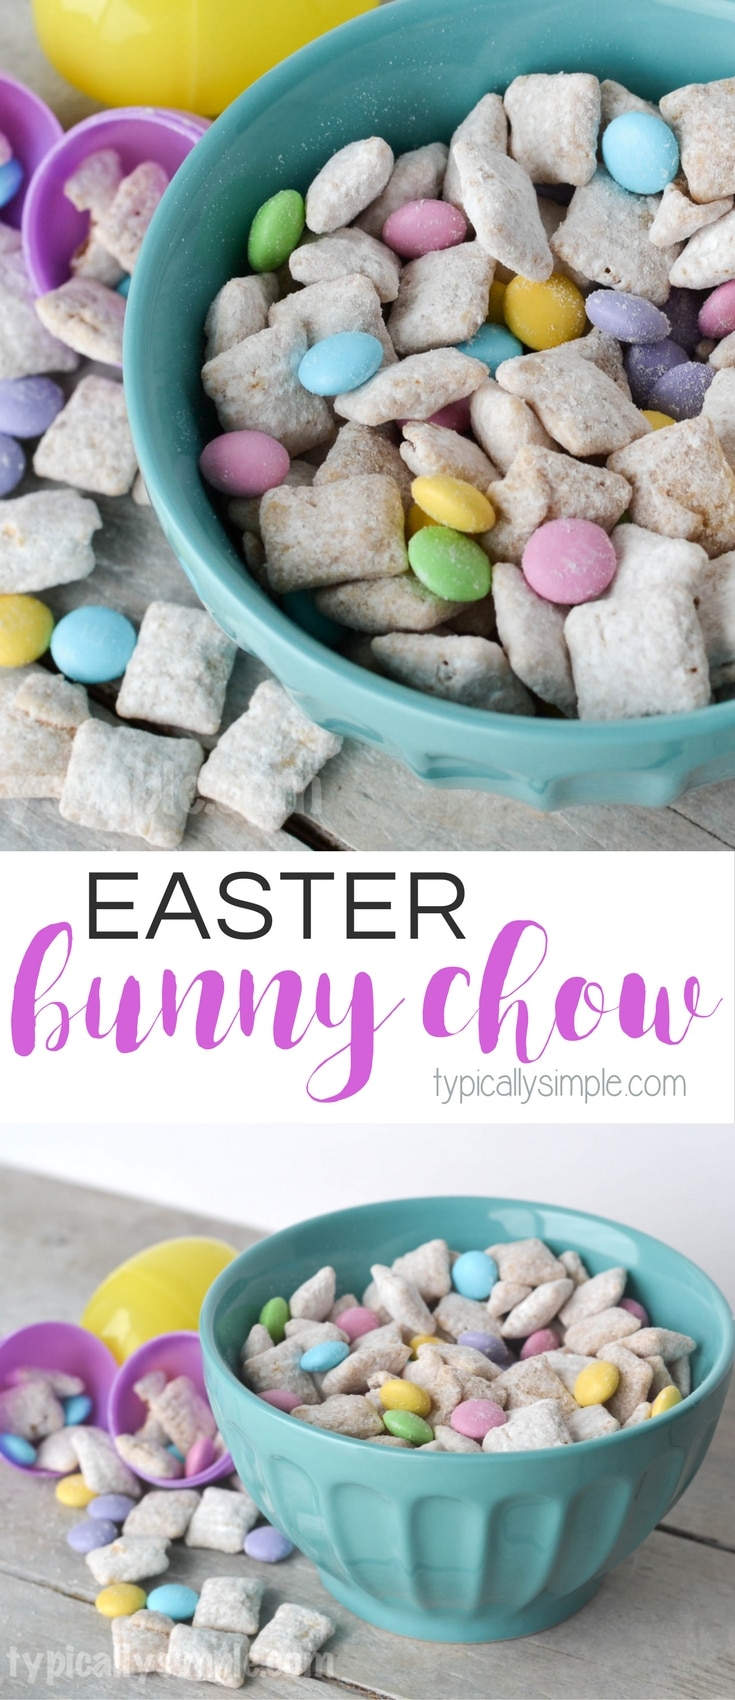 This Easter Bunny Chow recipe is a fun spin on Puppy Chow and makes the perfect treat for Easter or spring!